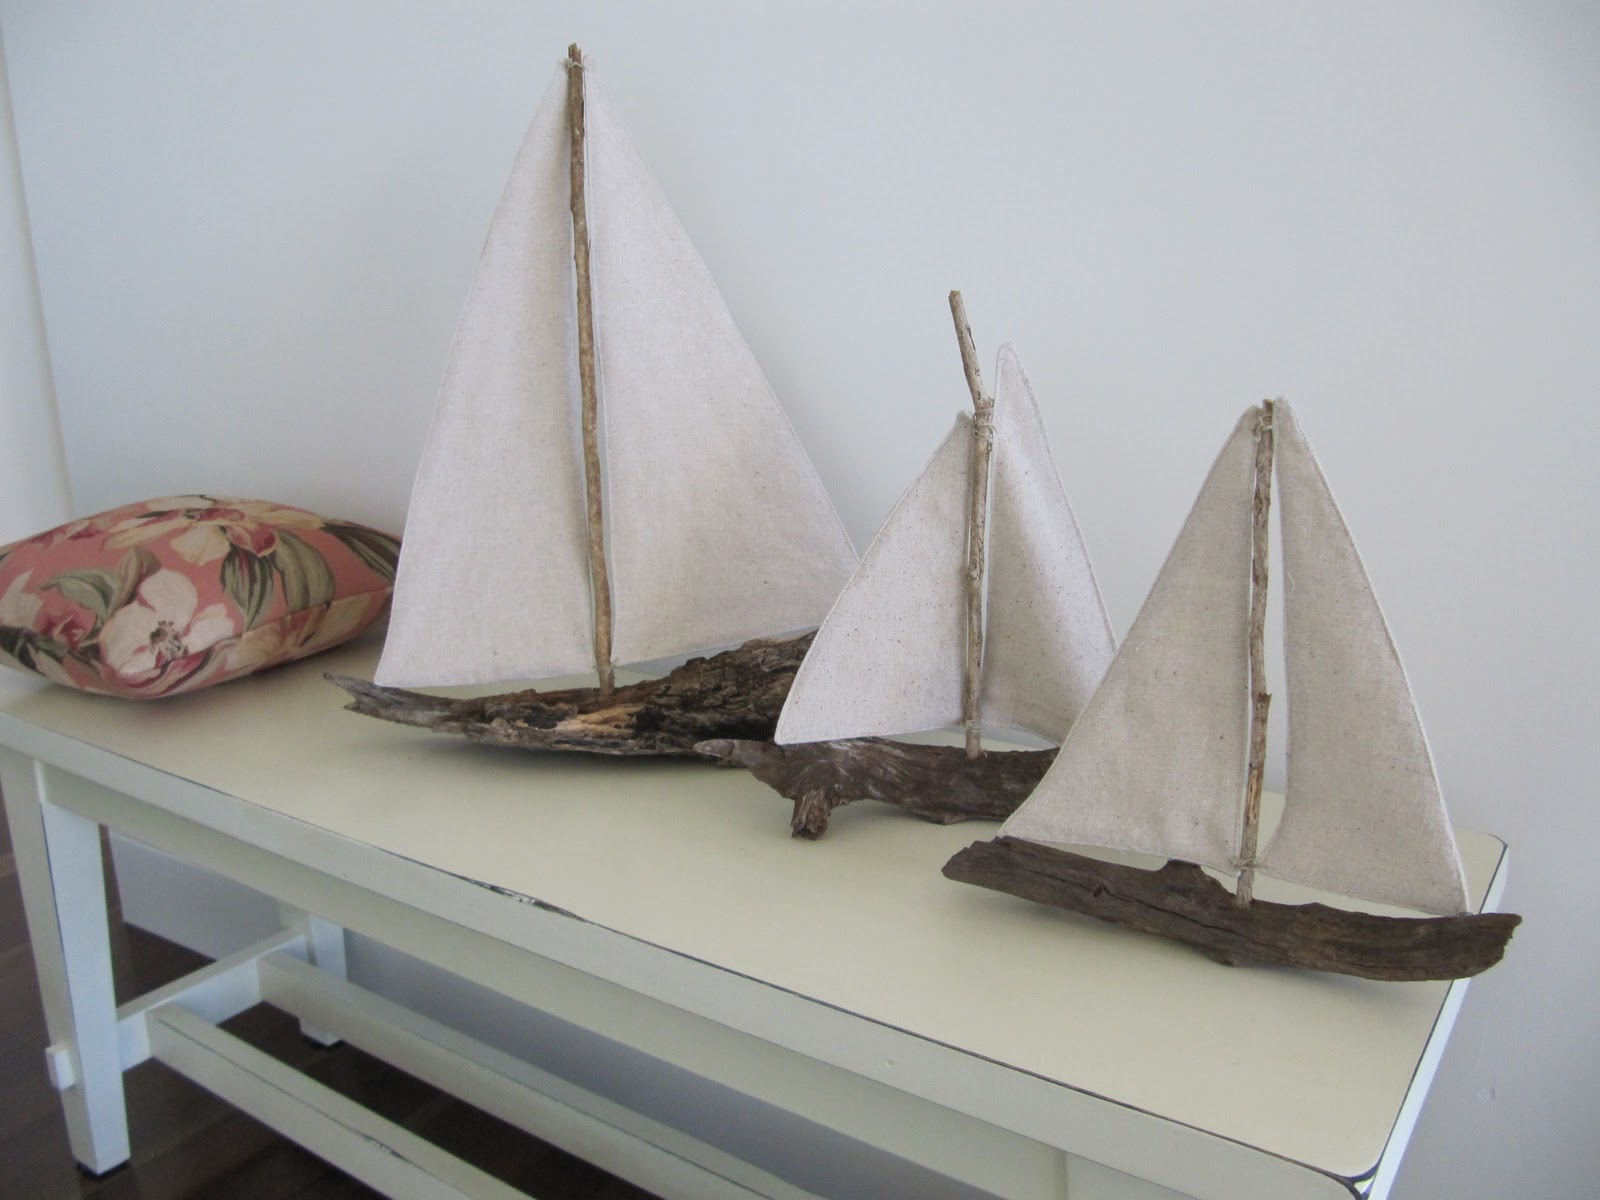 laurie's-projects: Driftwood Sailboat Tutorial